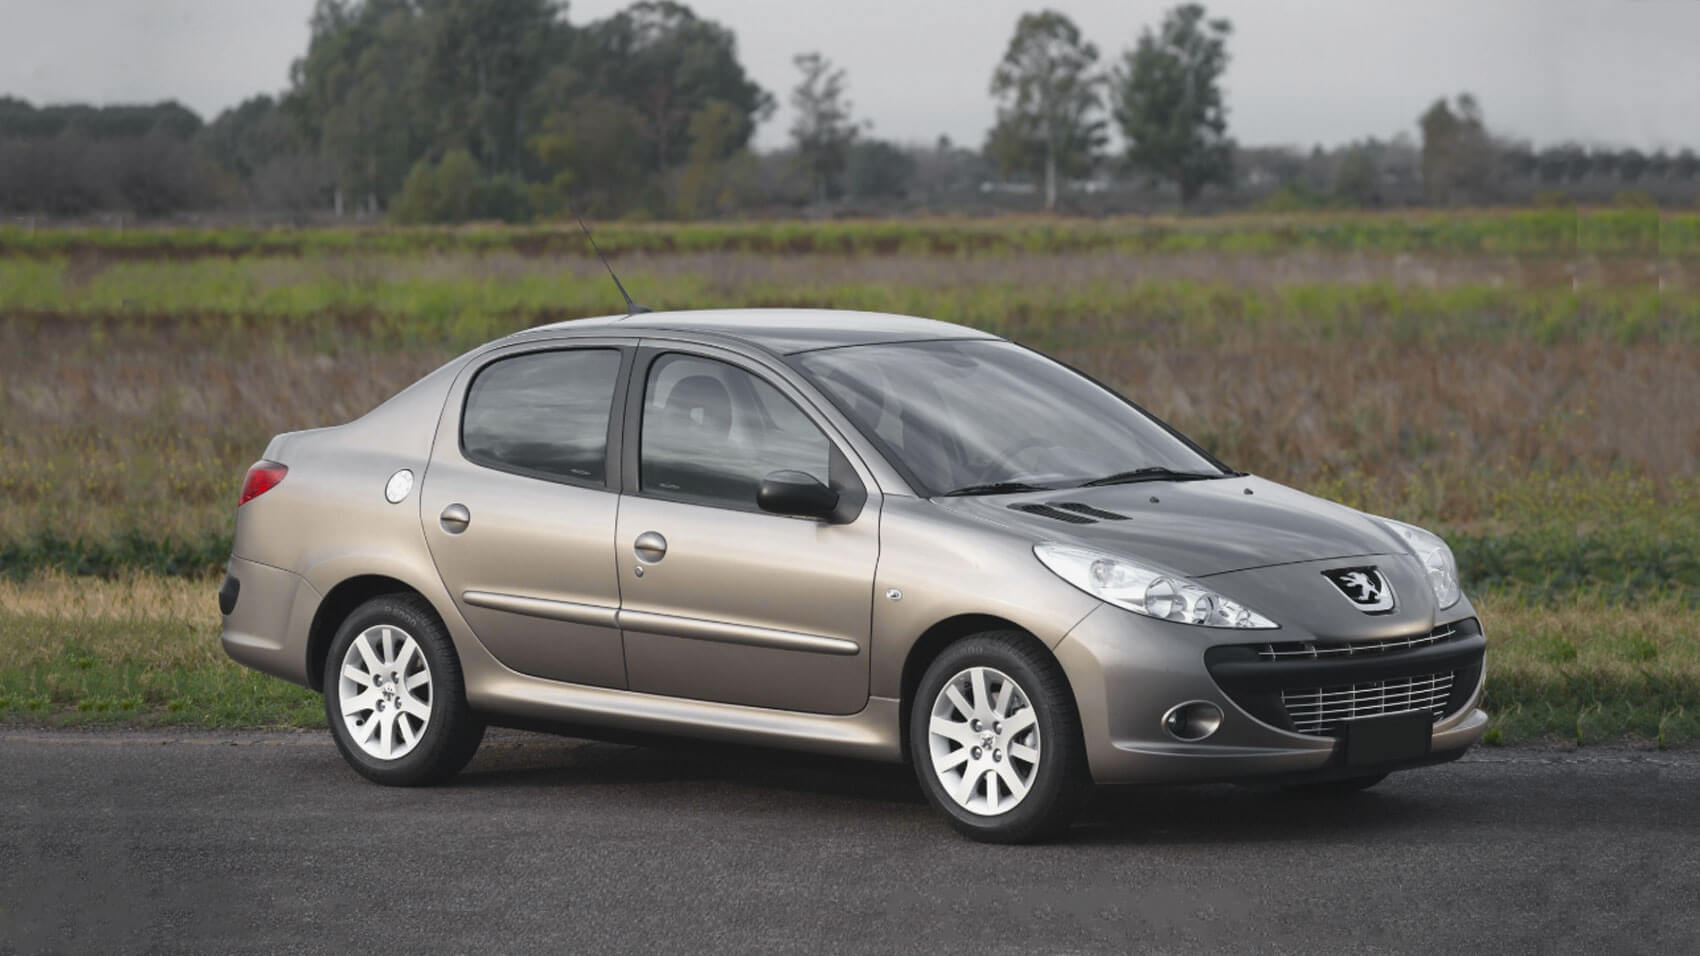 peugeot-207-sd-car-rental-without-driver-low-price-new-model